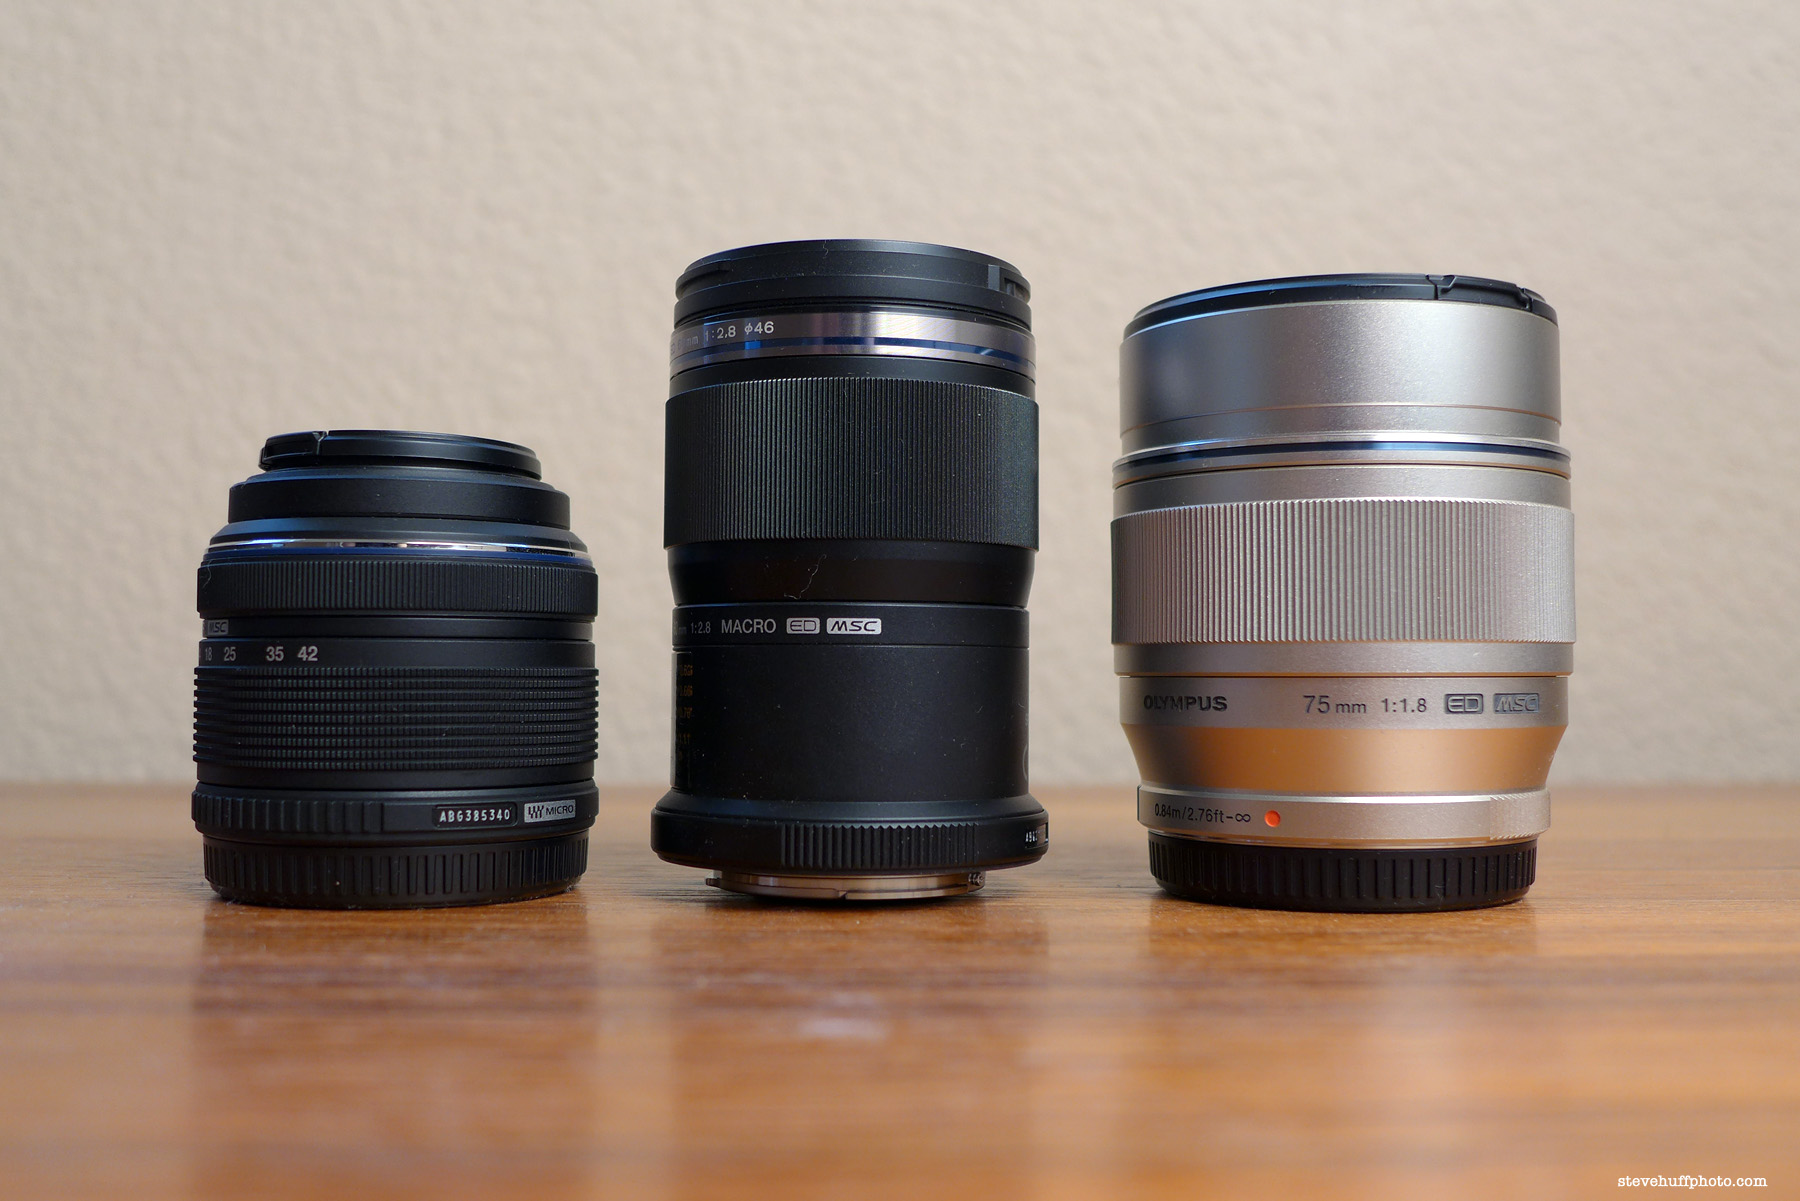 The Olympus ED 60mm f/2.8 Macro Lens Review for Micro 4/3 from a 